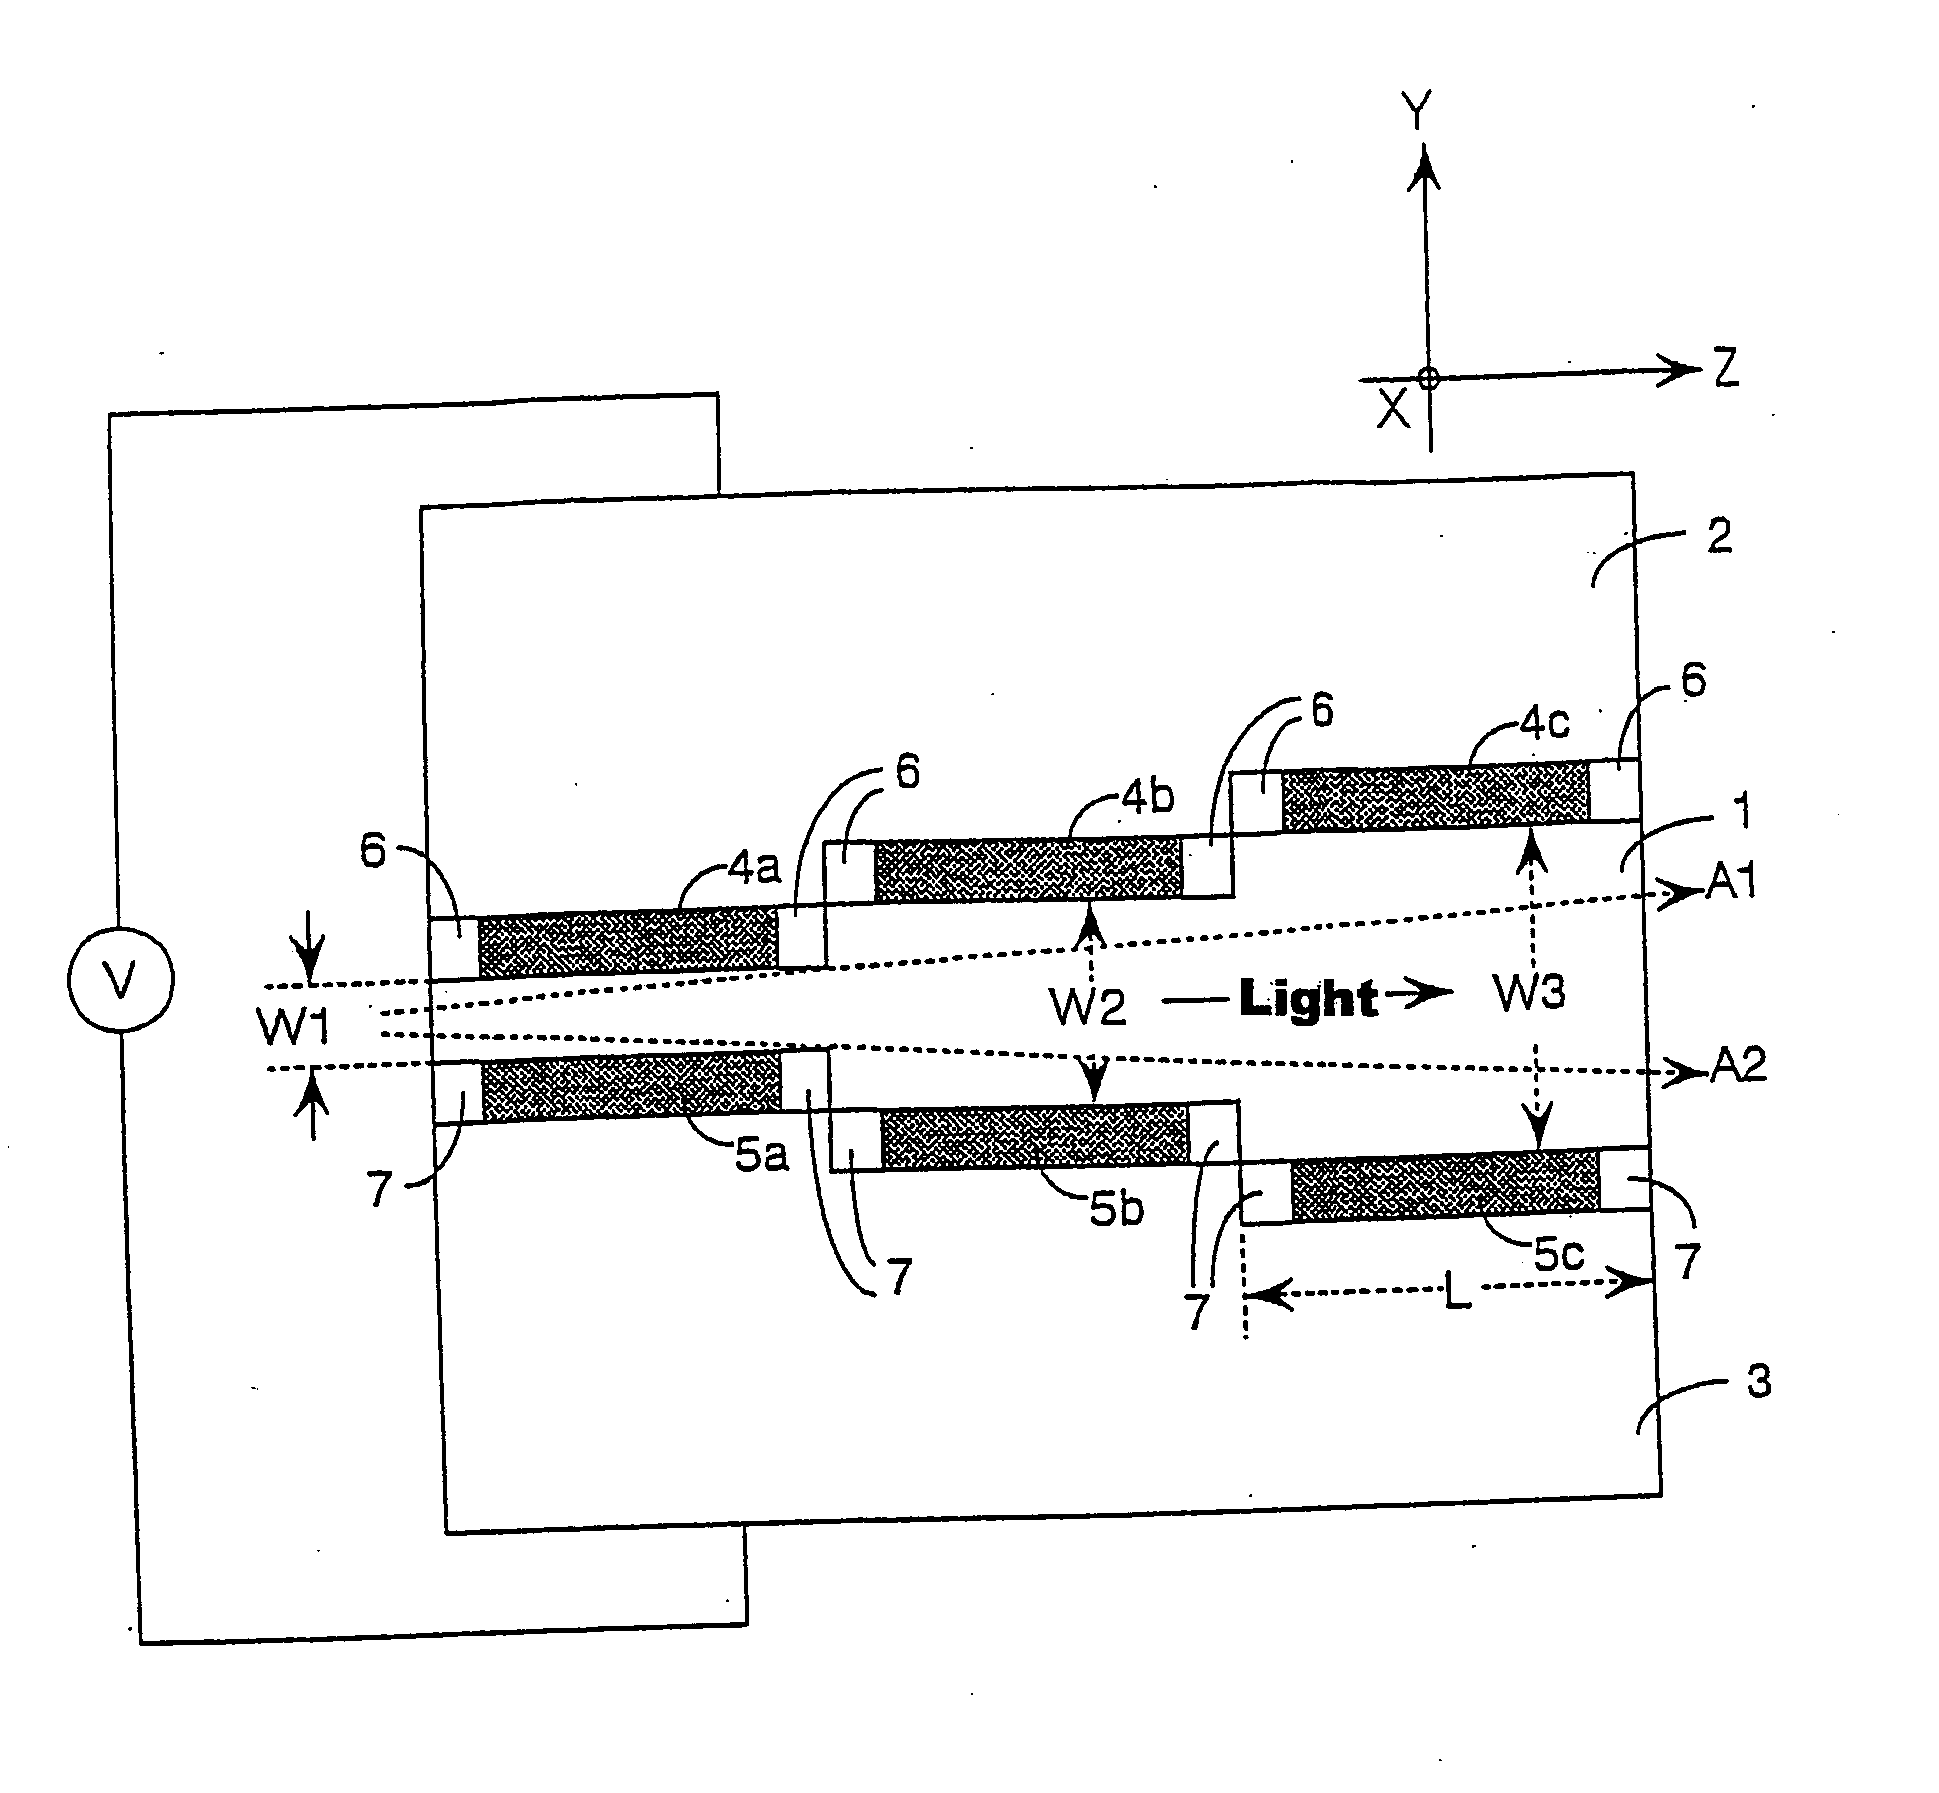 Optical path switching device